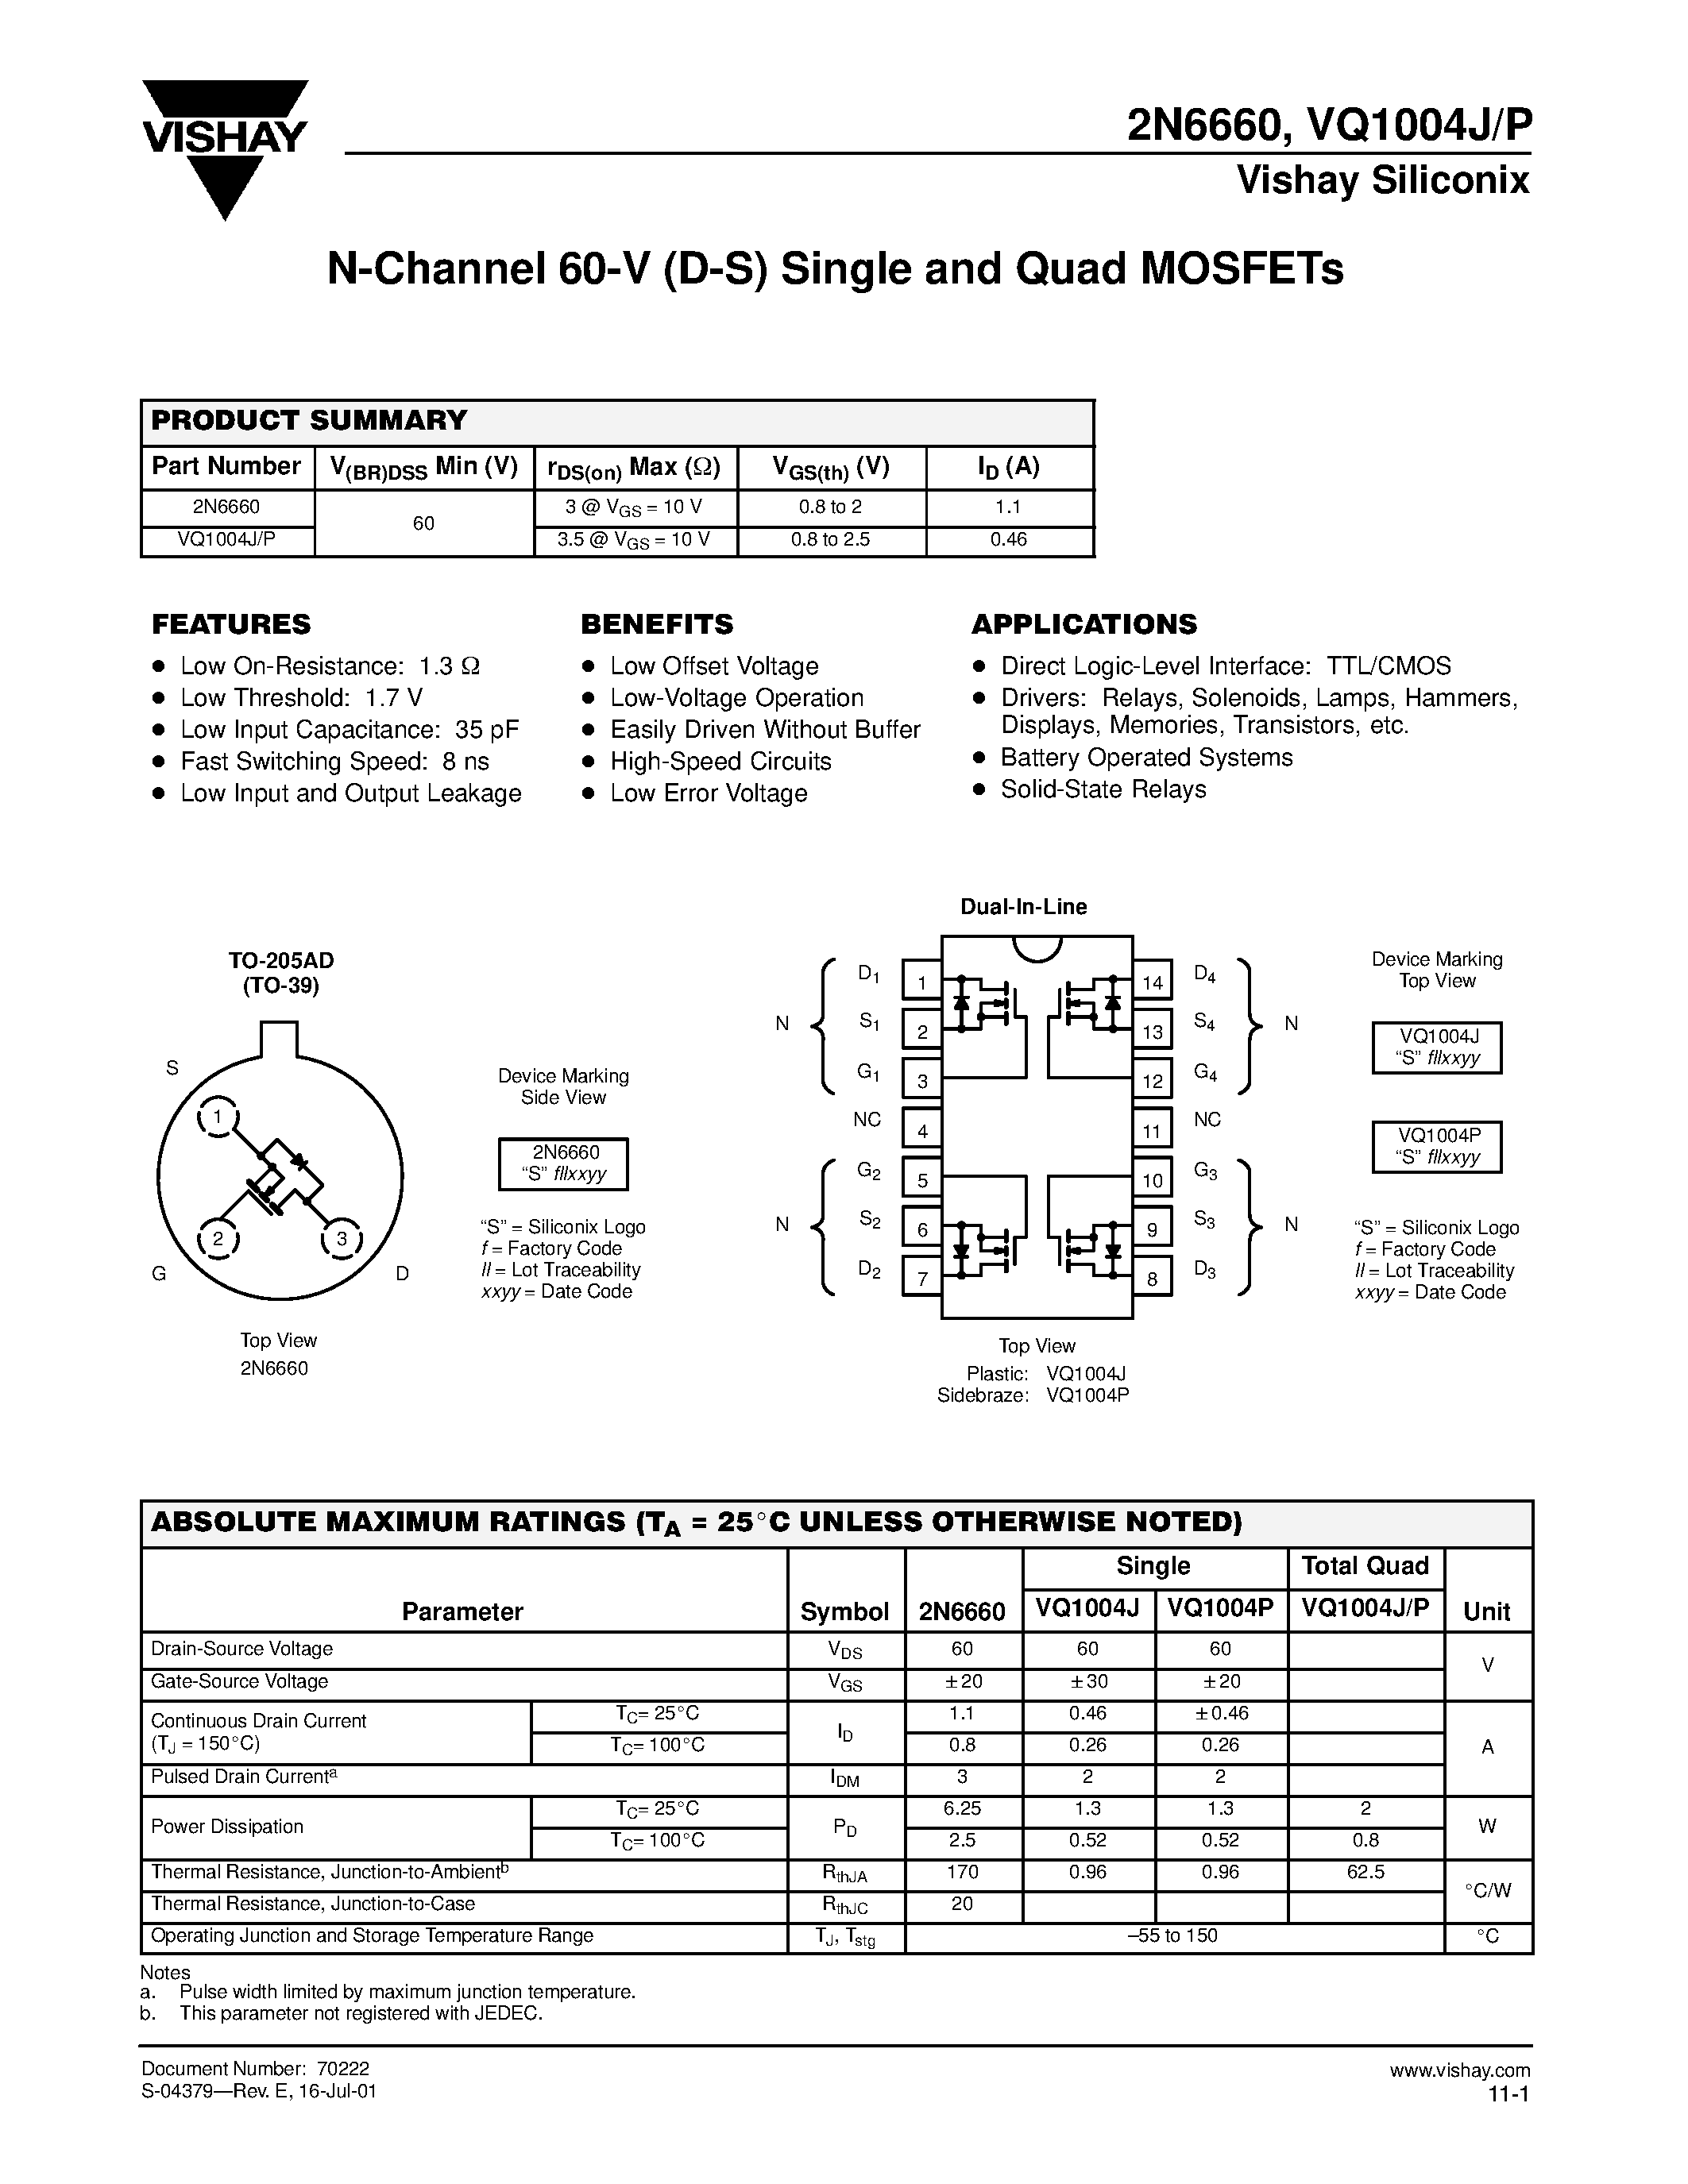 Datasheet VQ1004P - N-Channel 60-V (D-S) Single and Quad MOSFETs page 1